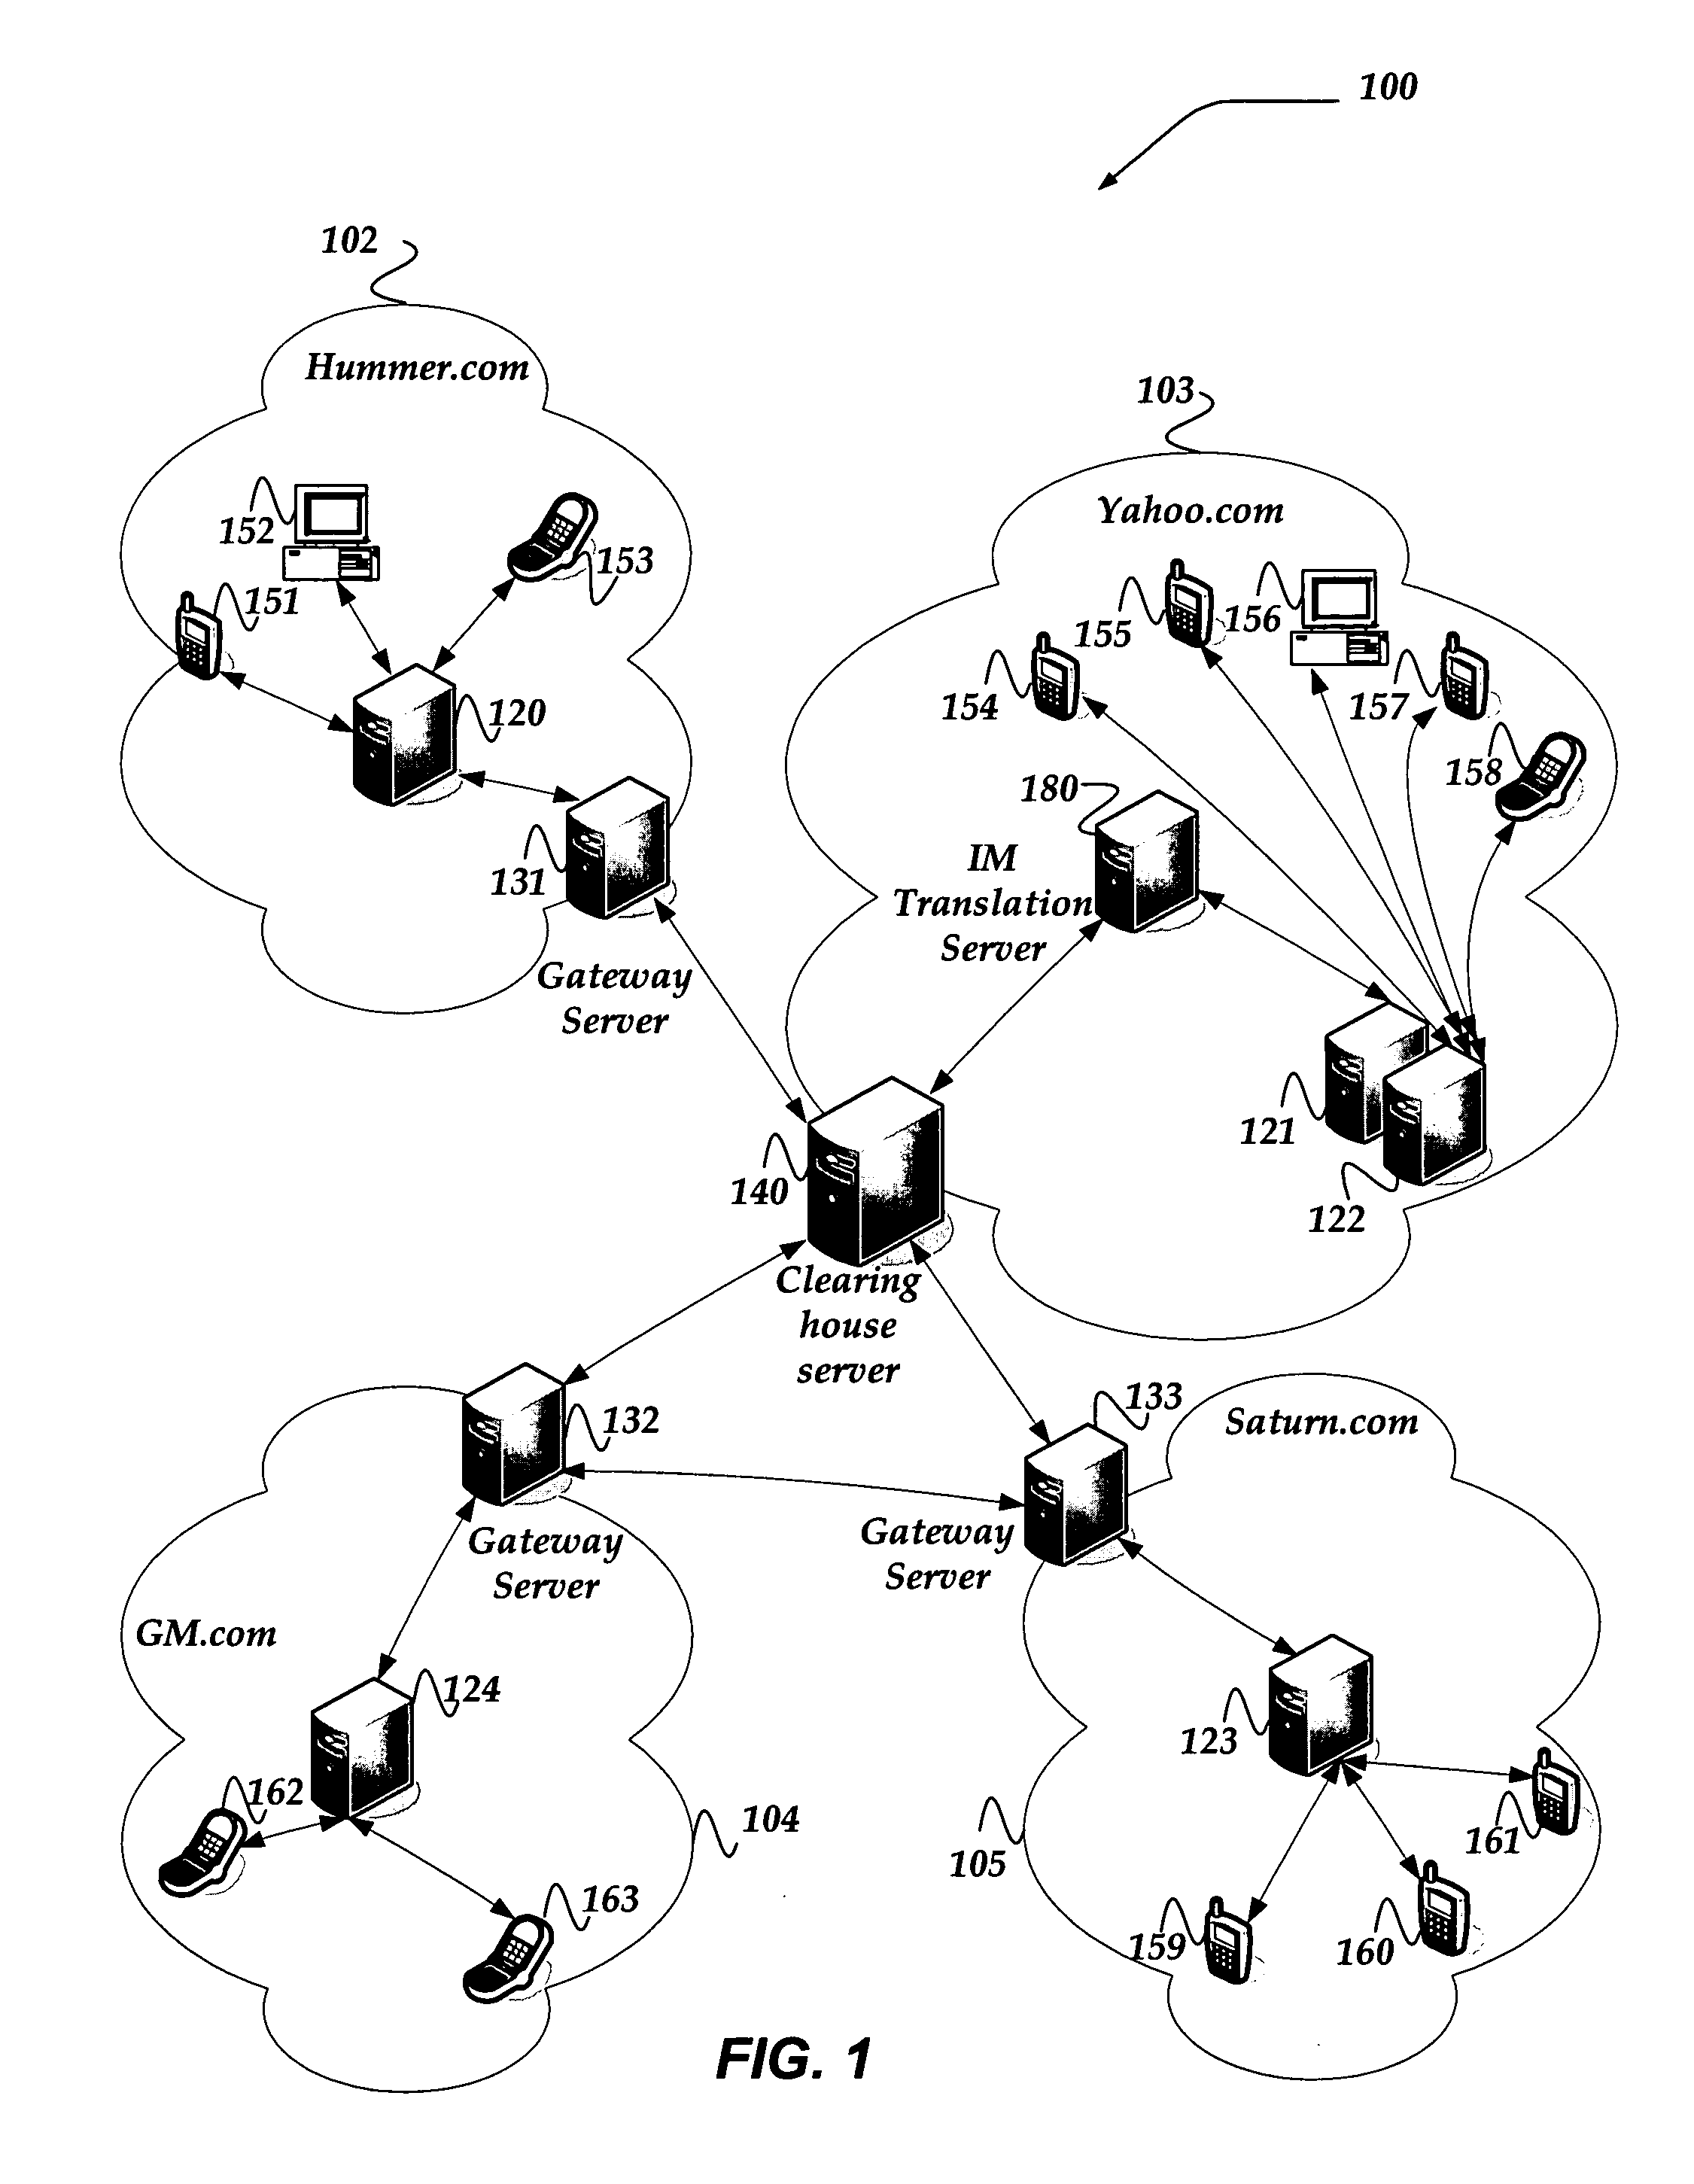 Clearinghouse for messages between disparate networks